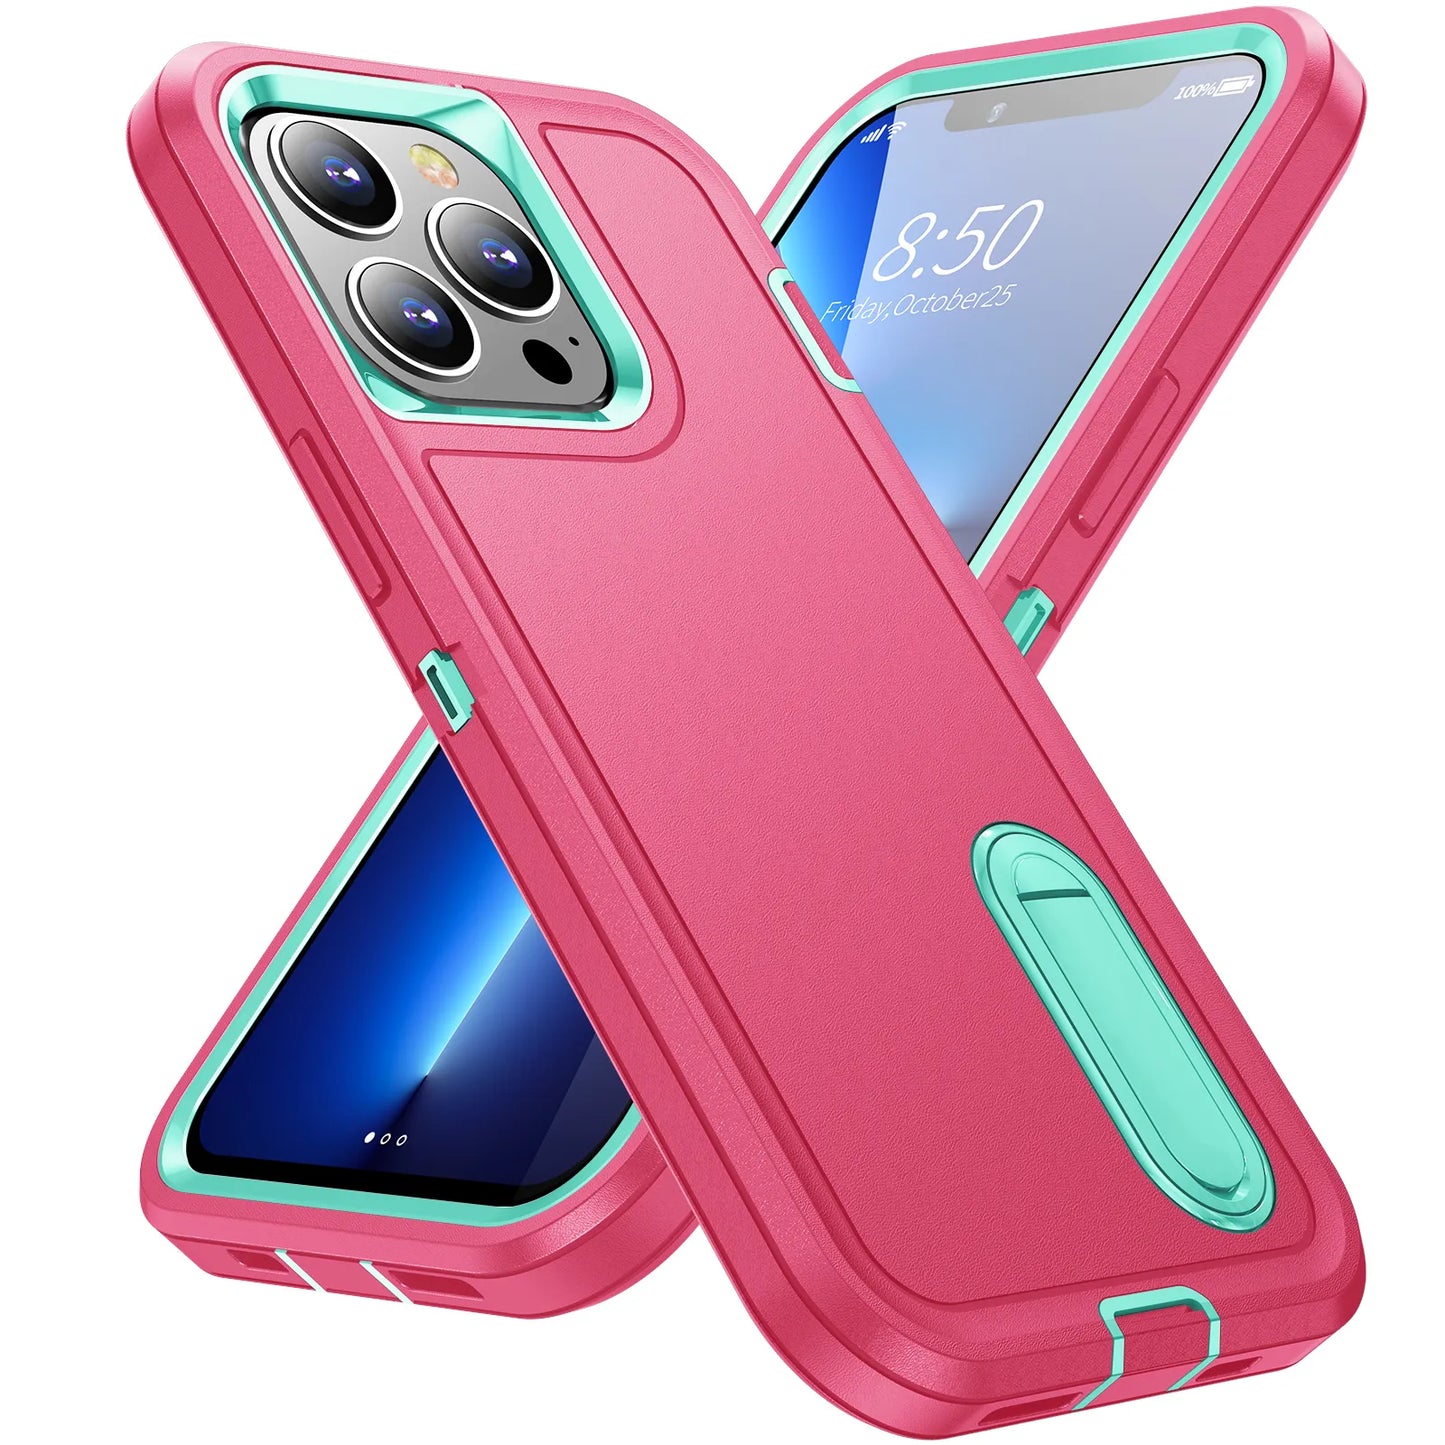 Defend Heavy Armour Shockproof iPhone Case - Hot Pink